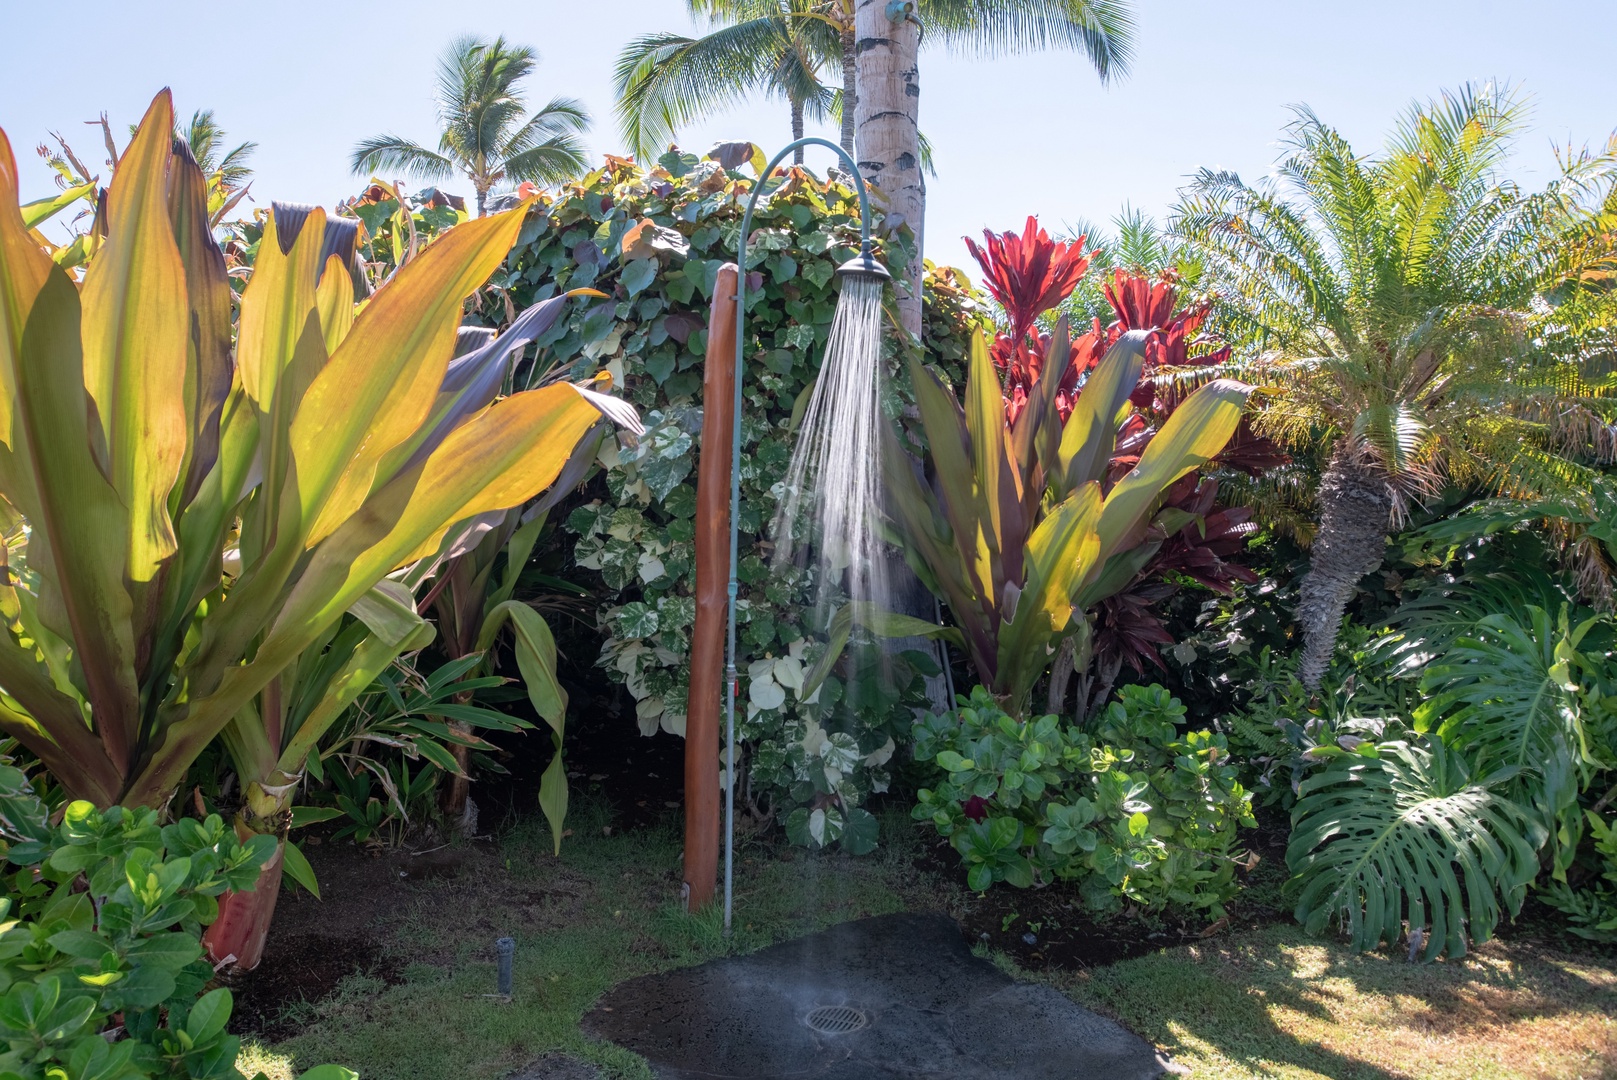 Waikoloa Vacation Rentals, 3BD Hali'i Kai (12G) at Waikoloa Resort - Outdoor shower by the pool surrounded by colorful tropical foliage